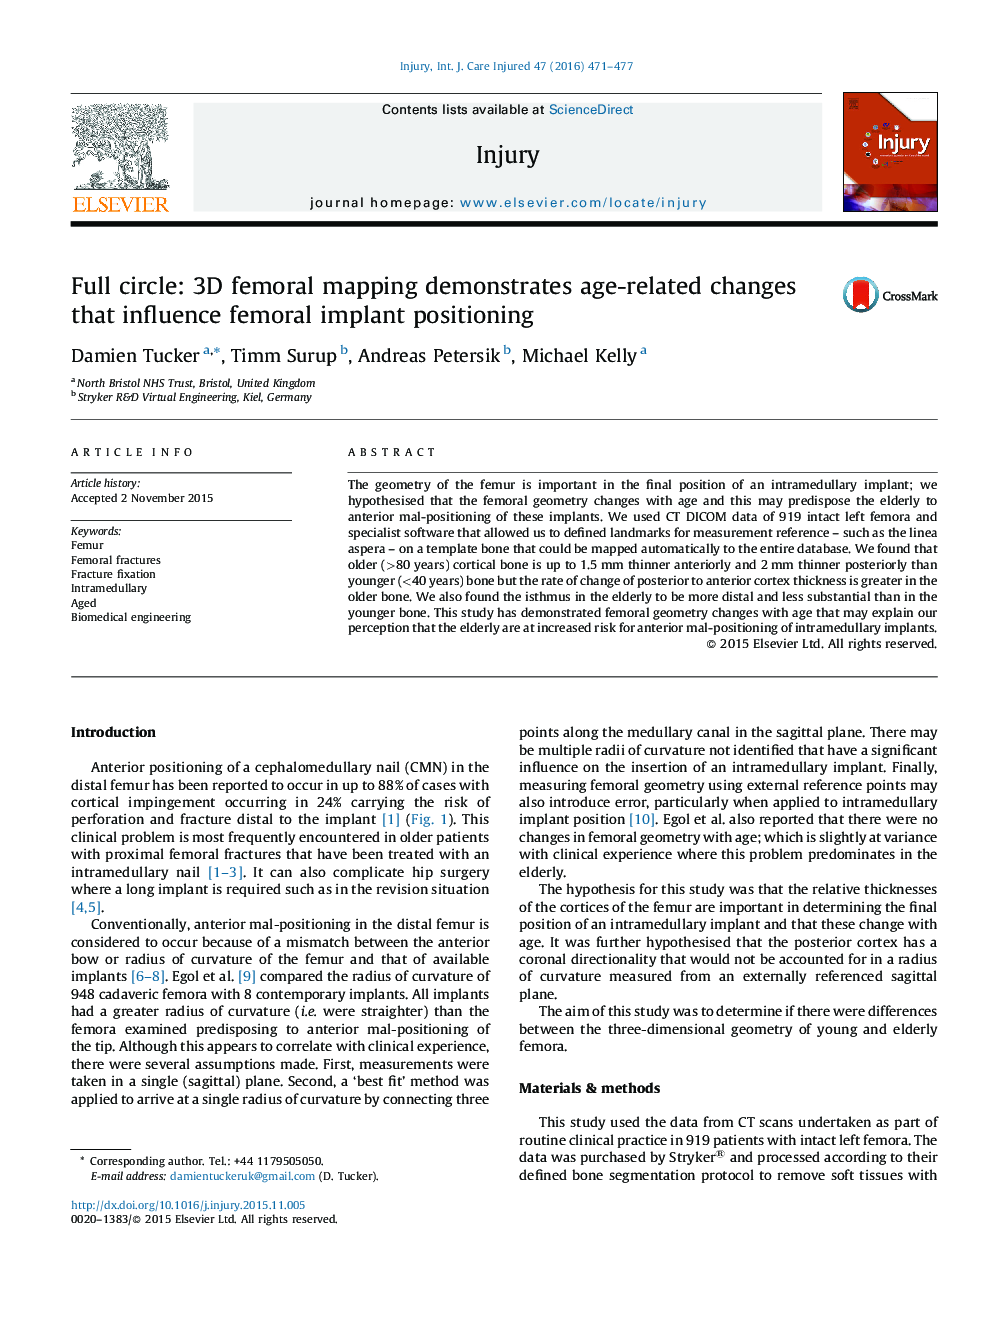 Full circle: 3D femoral mapping demonstrates age-related changes that influence femoral implant positioning